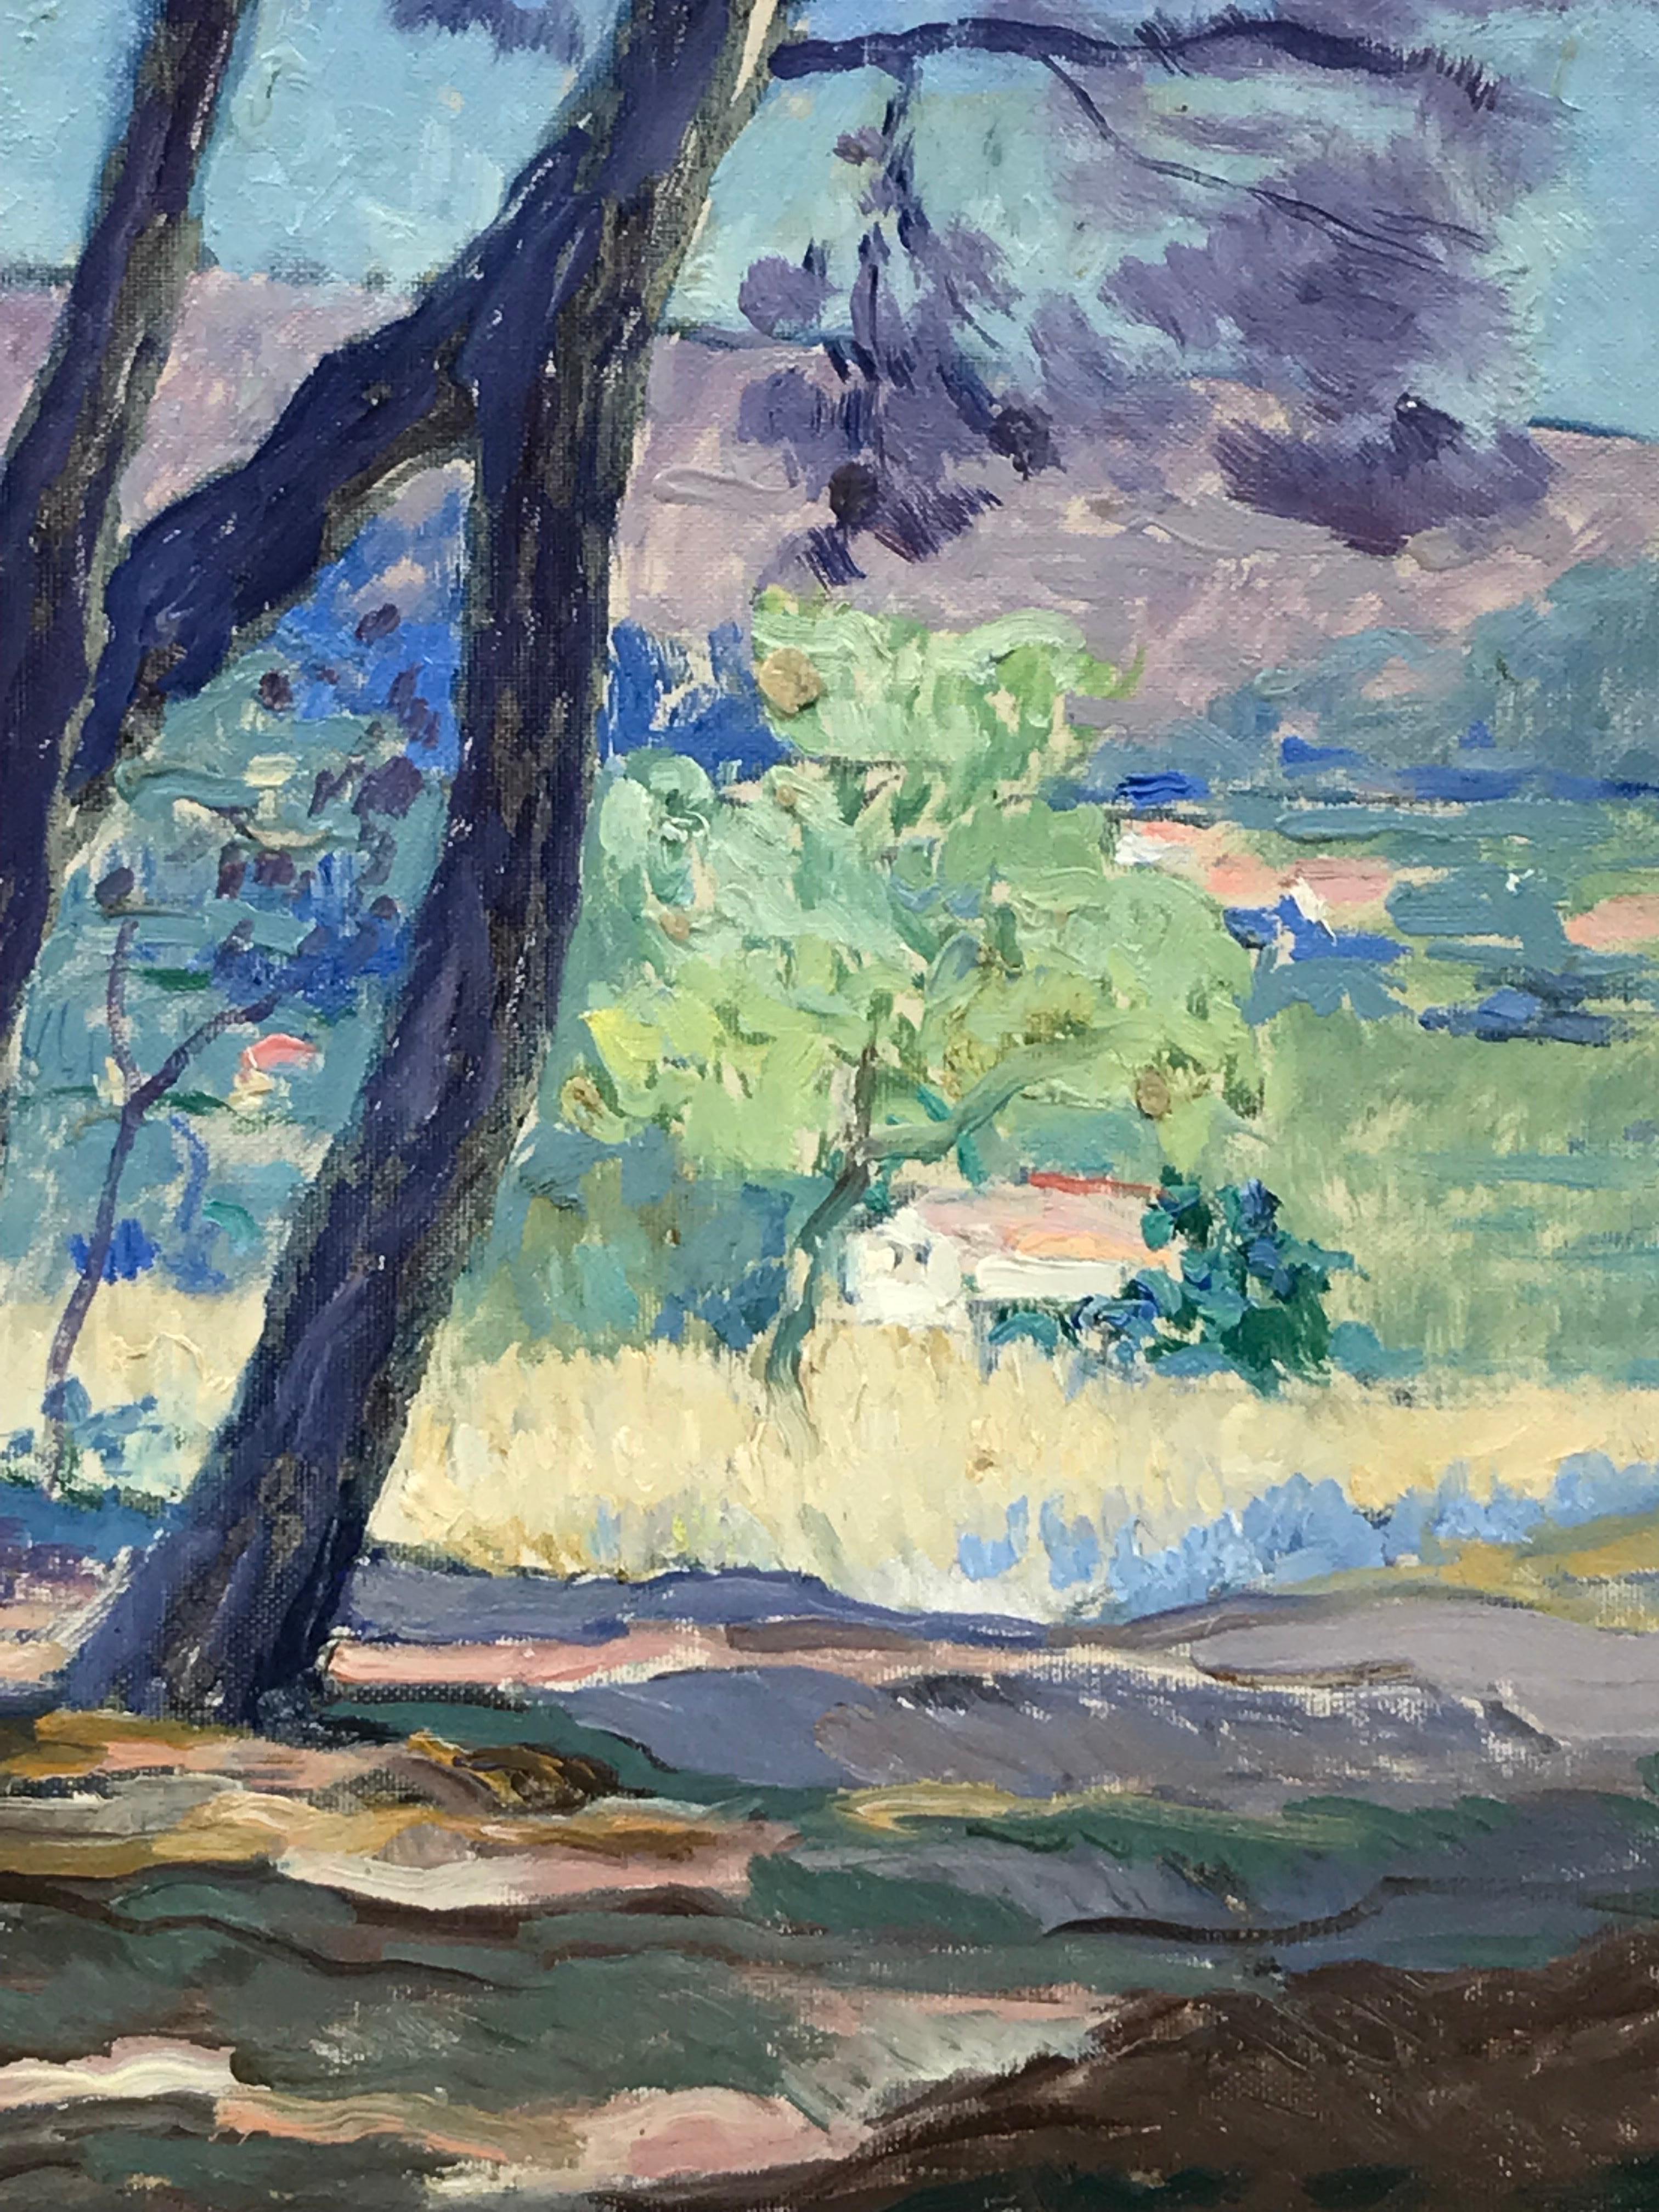 Artist/ School: French School, circa 1930's, inscribed verso.

Title: Summer in Provence

Medium: oil painting on canvas board, unframed, 

board: 15 x 18 inches

Provenance: private collection, France

Condition: The painting is in overall very